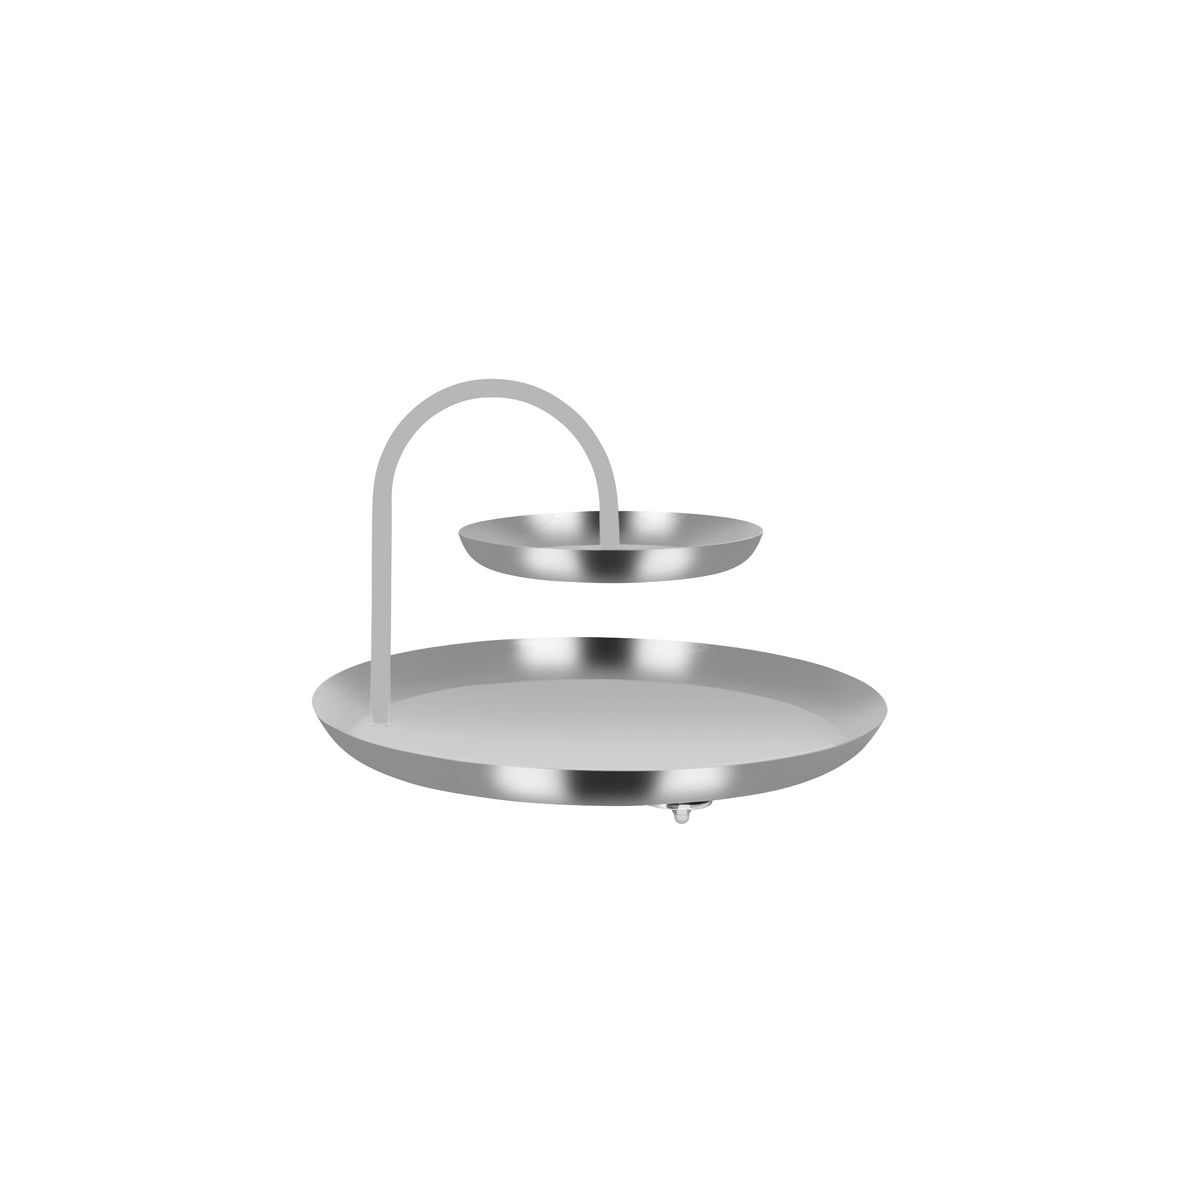 06992 Chef Inox Round Seafood Stand 2-Tier Stainless Steel / Iron 365x365x255mm Tomkin Australia Hospitality Supplies